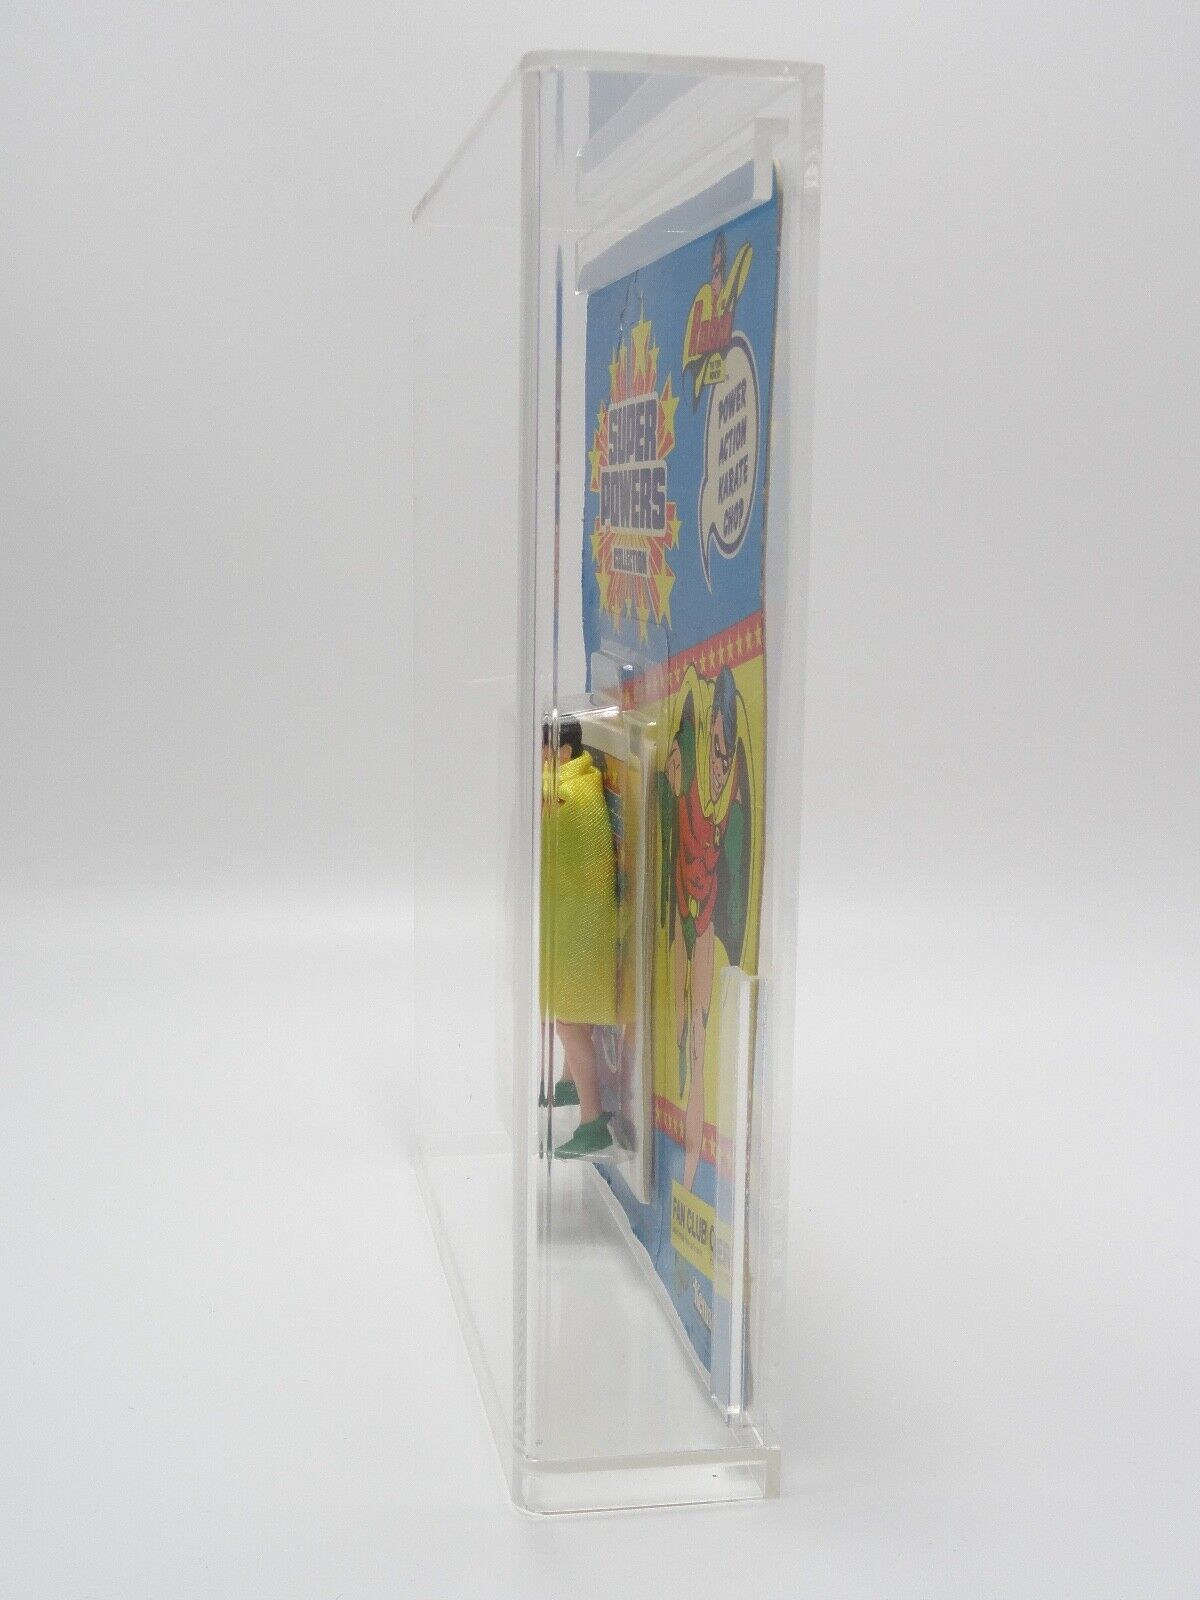 KENNER SUPER POWERS COLLECTION ROBIN FIGURE IN ACRYLIC CASE